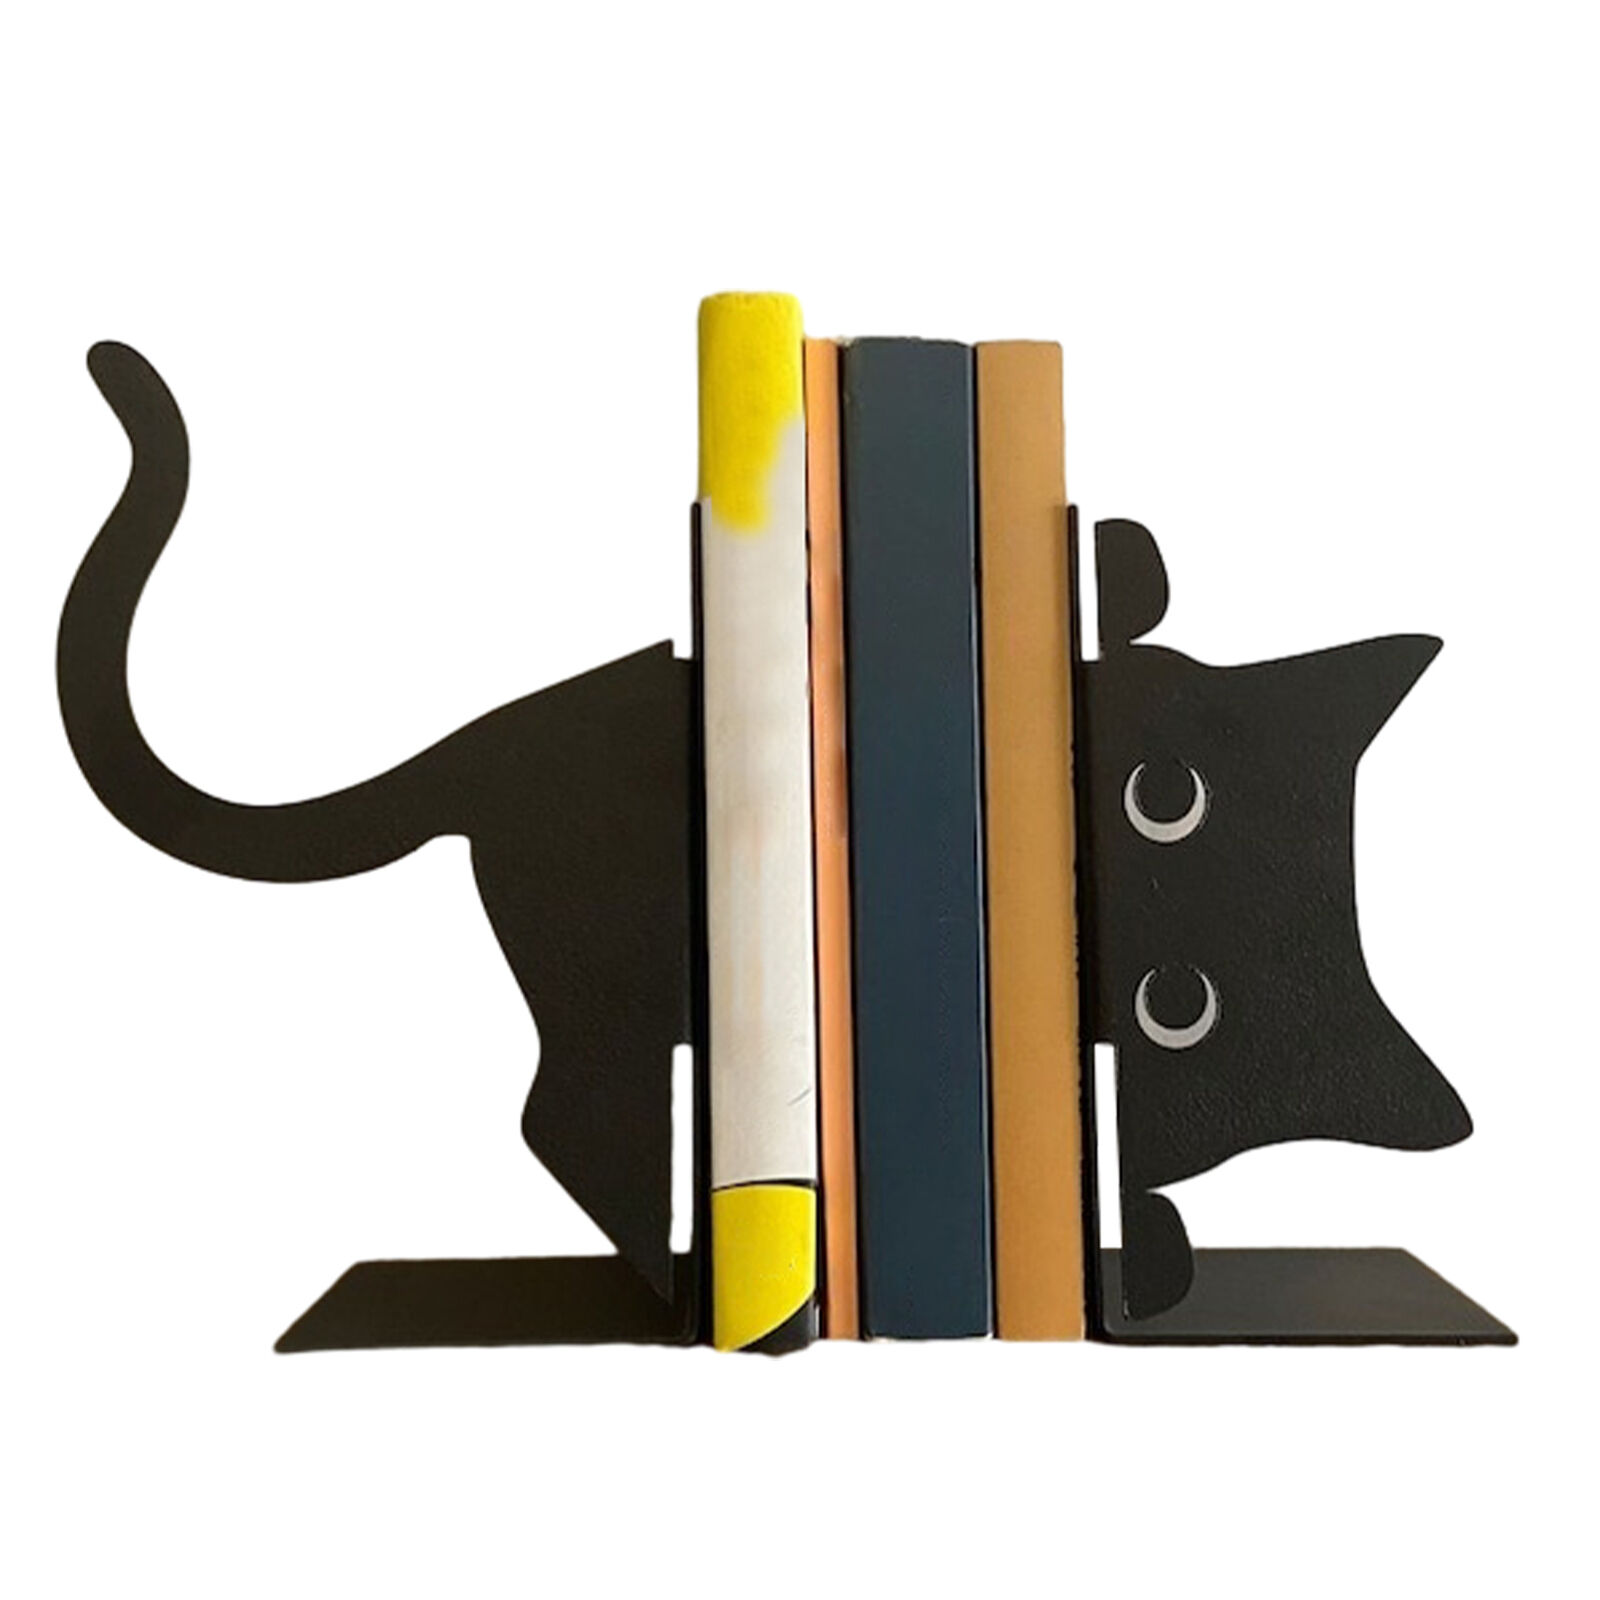 Cat Bookends For Shelves 1 Pair Metal Unique Bookends To Hold Books Heavy Duty